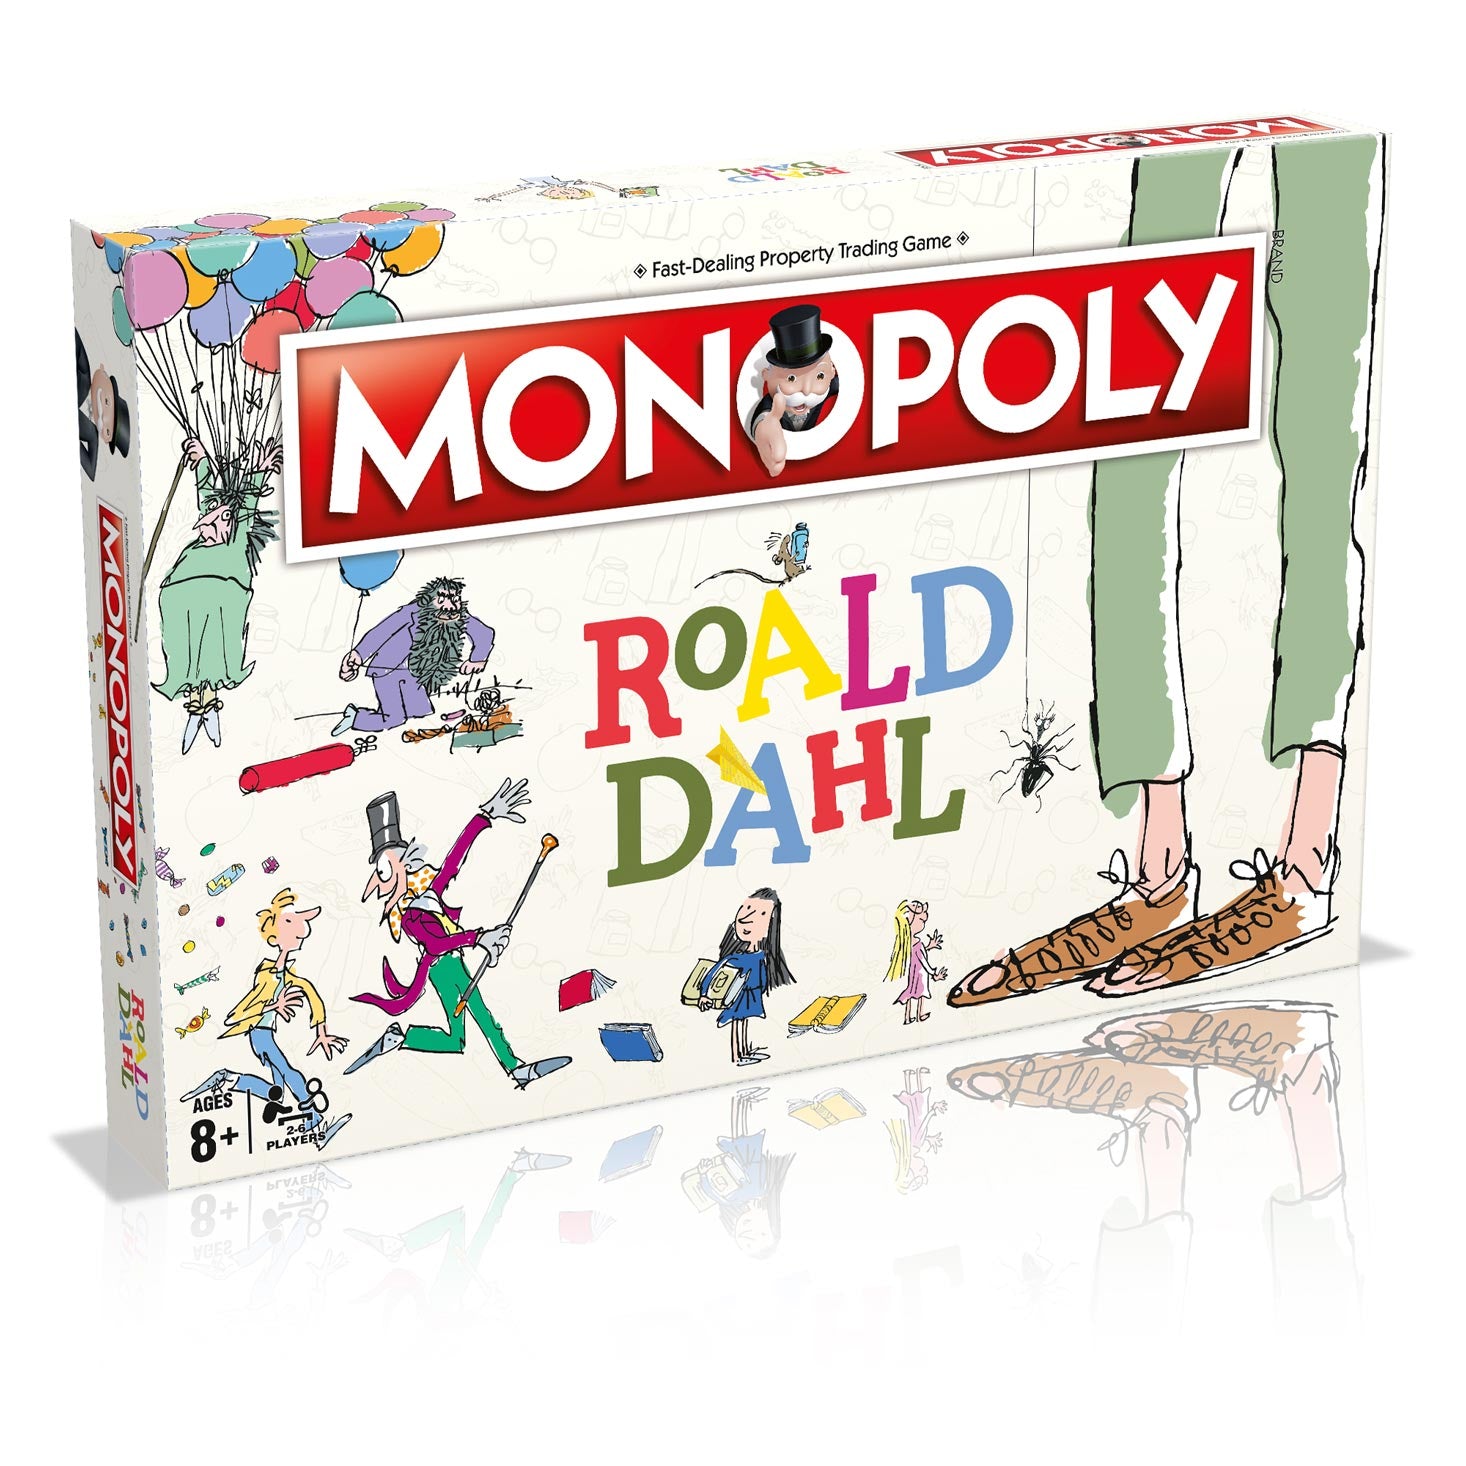 Monopoly board game based on characters by Roald Dahl and featuring Quentin Blake's illustrations